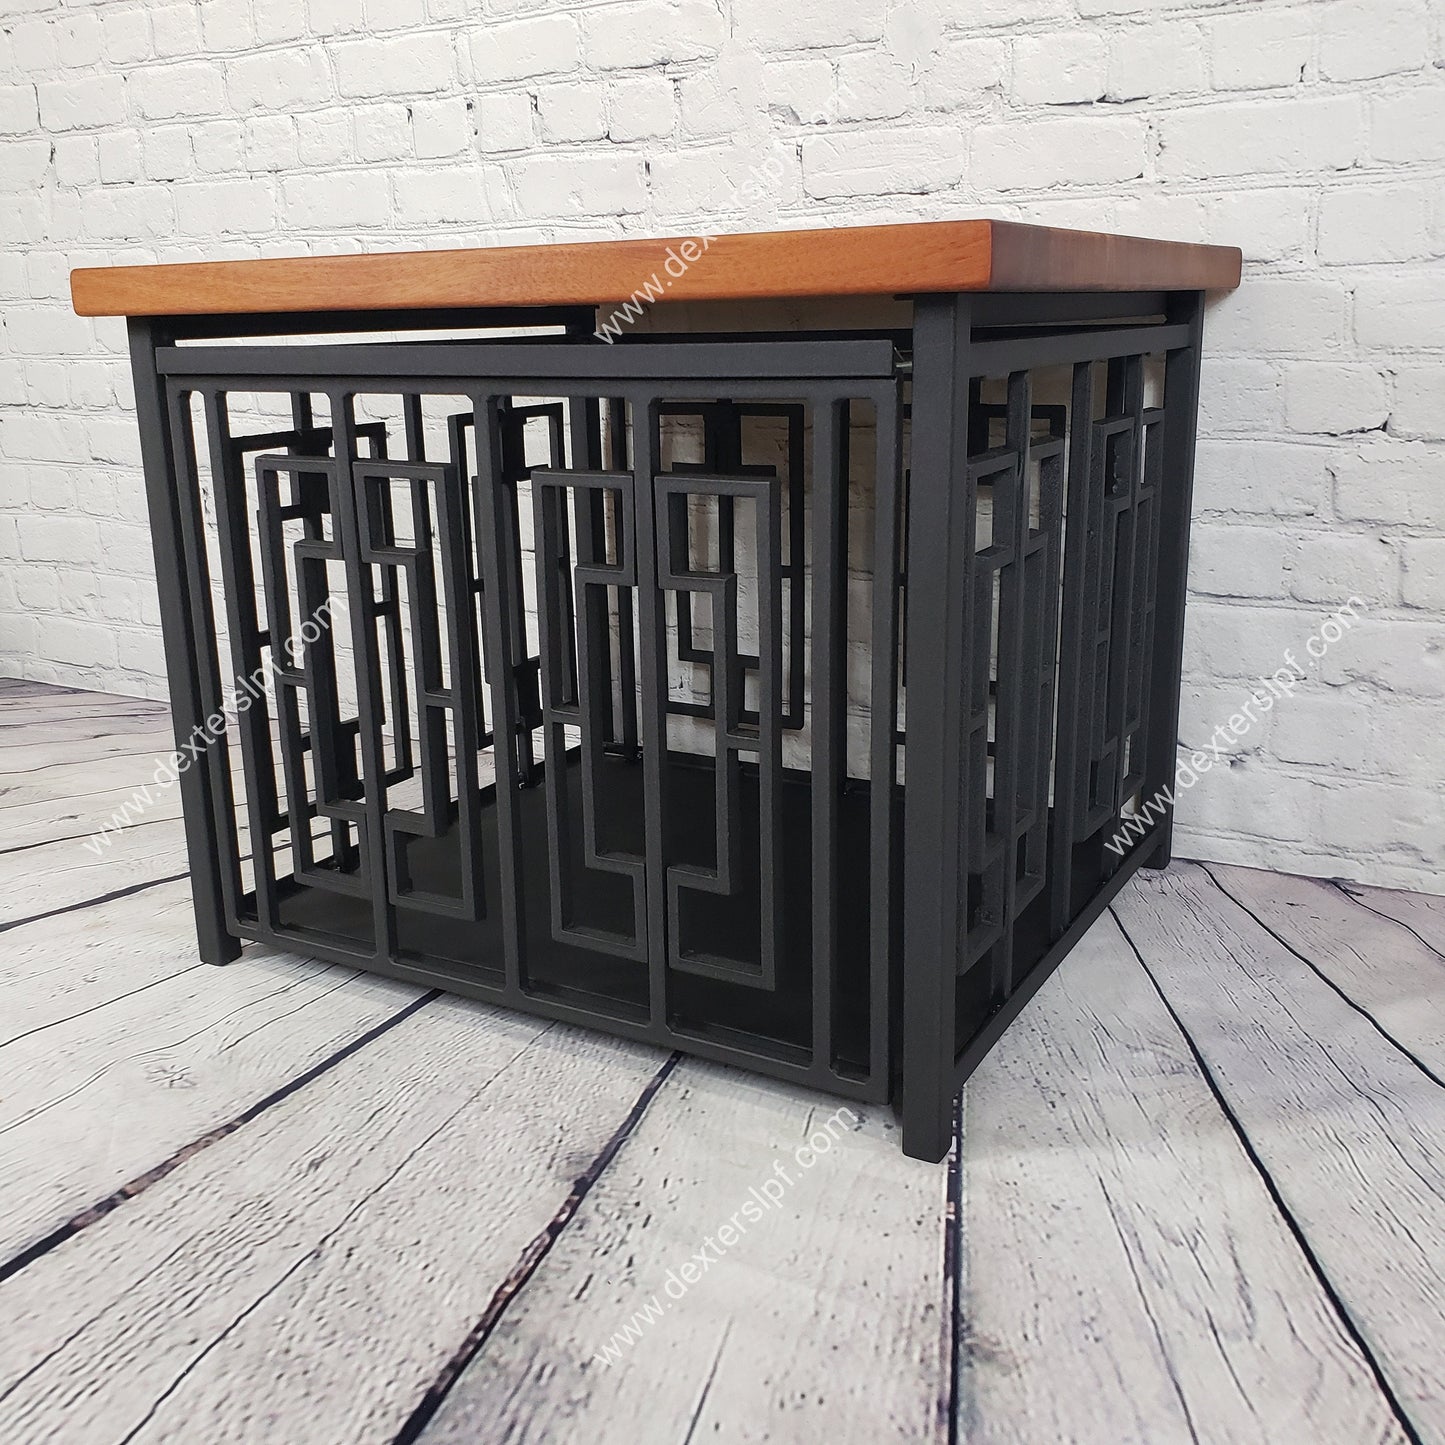 Layla Small Wide, Dog Crate Table, Modern Dog Crate, Dog Crate Furniture, Dog Kennel Furniture, Dog Crate End Table